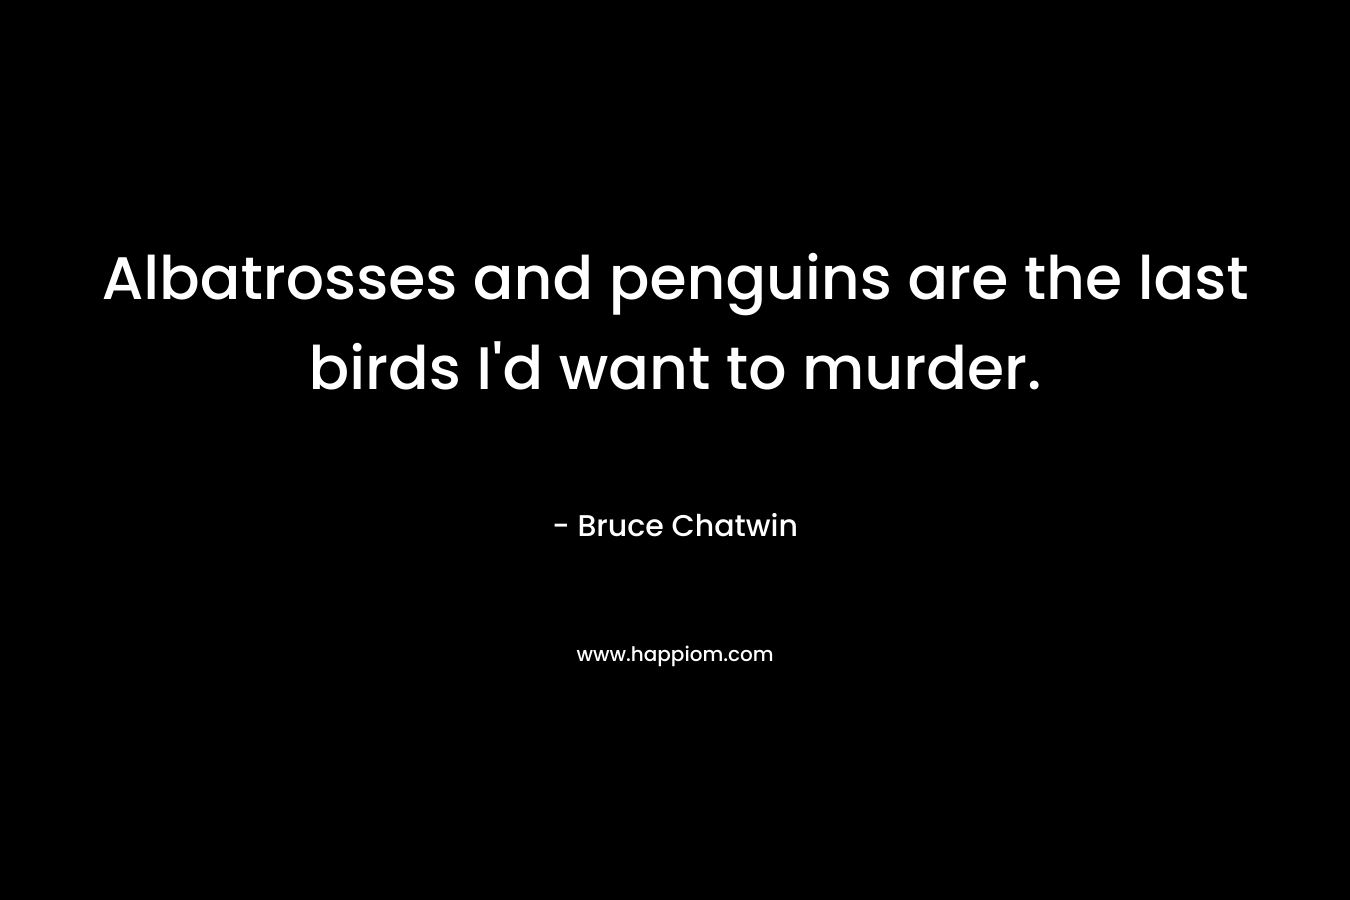 Albatrosses and penguins are the last birds I’d want to murder. – Bruce Chatwin